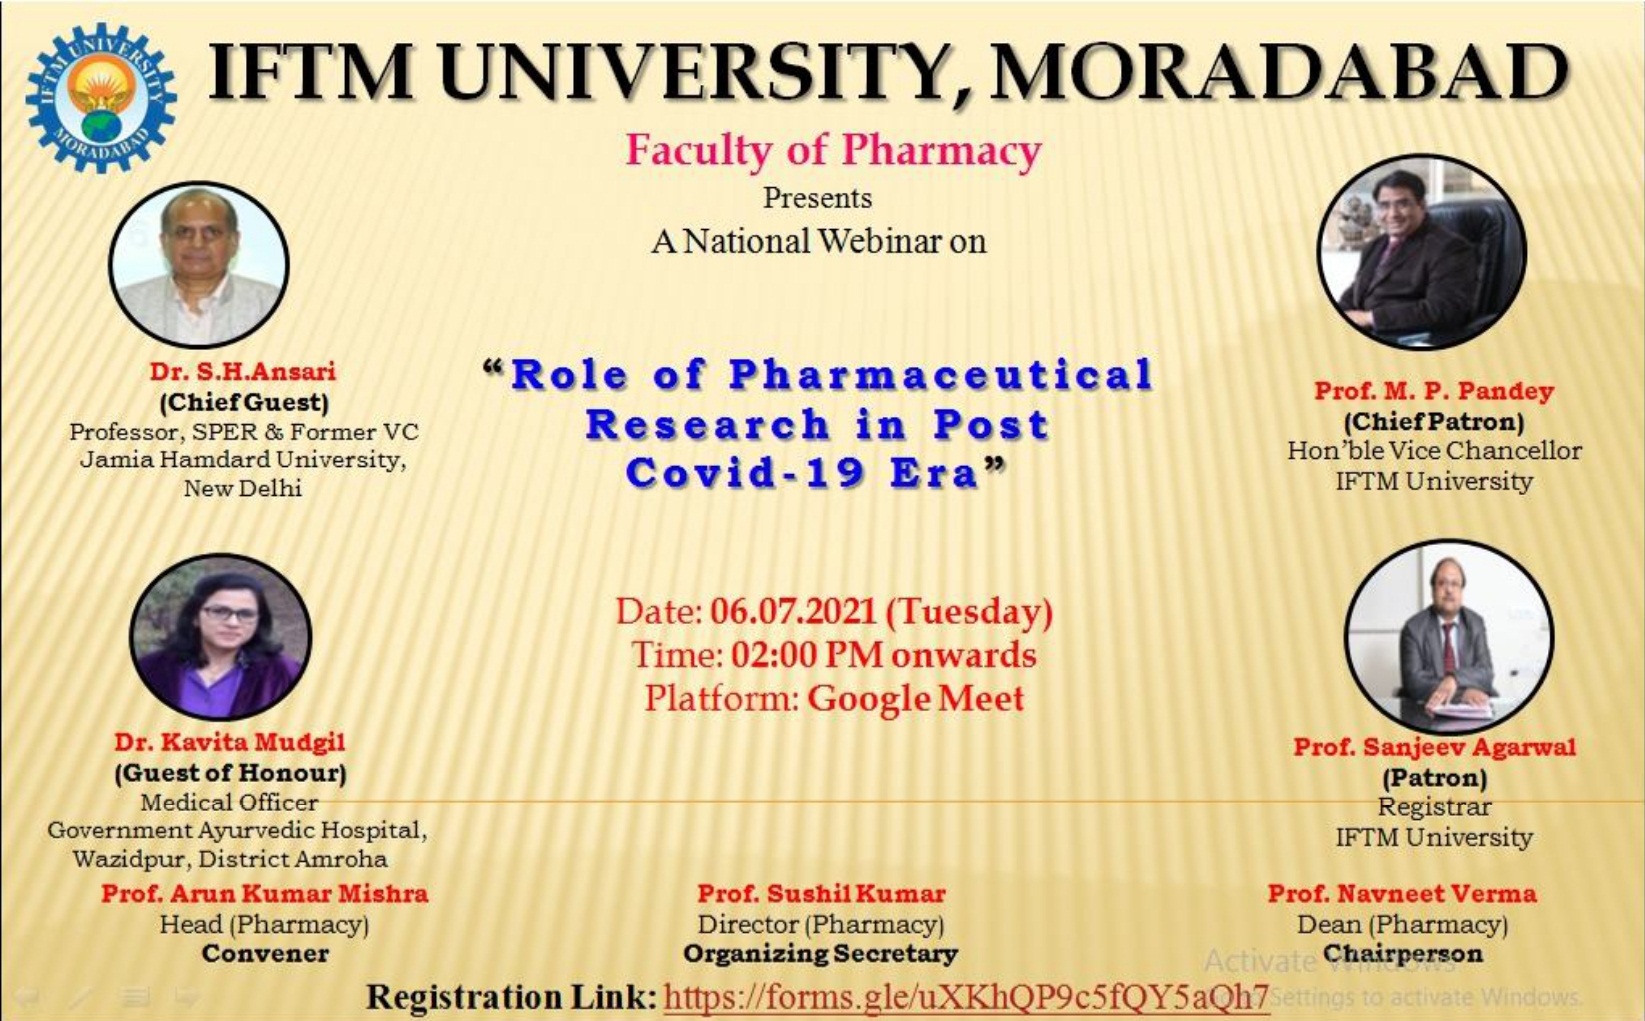 Online Webinar on Role of Pharmaceutical Research in Post Covid-19 Era